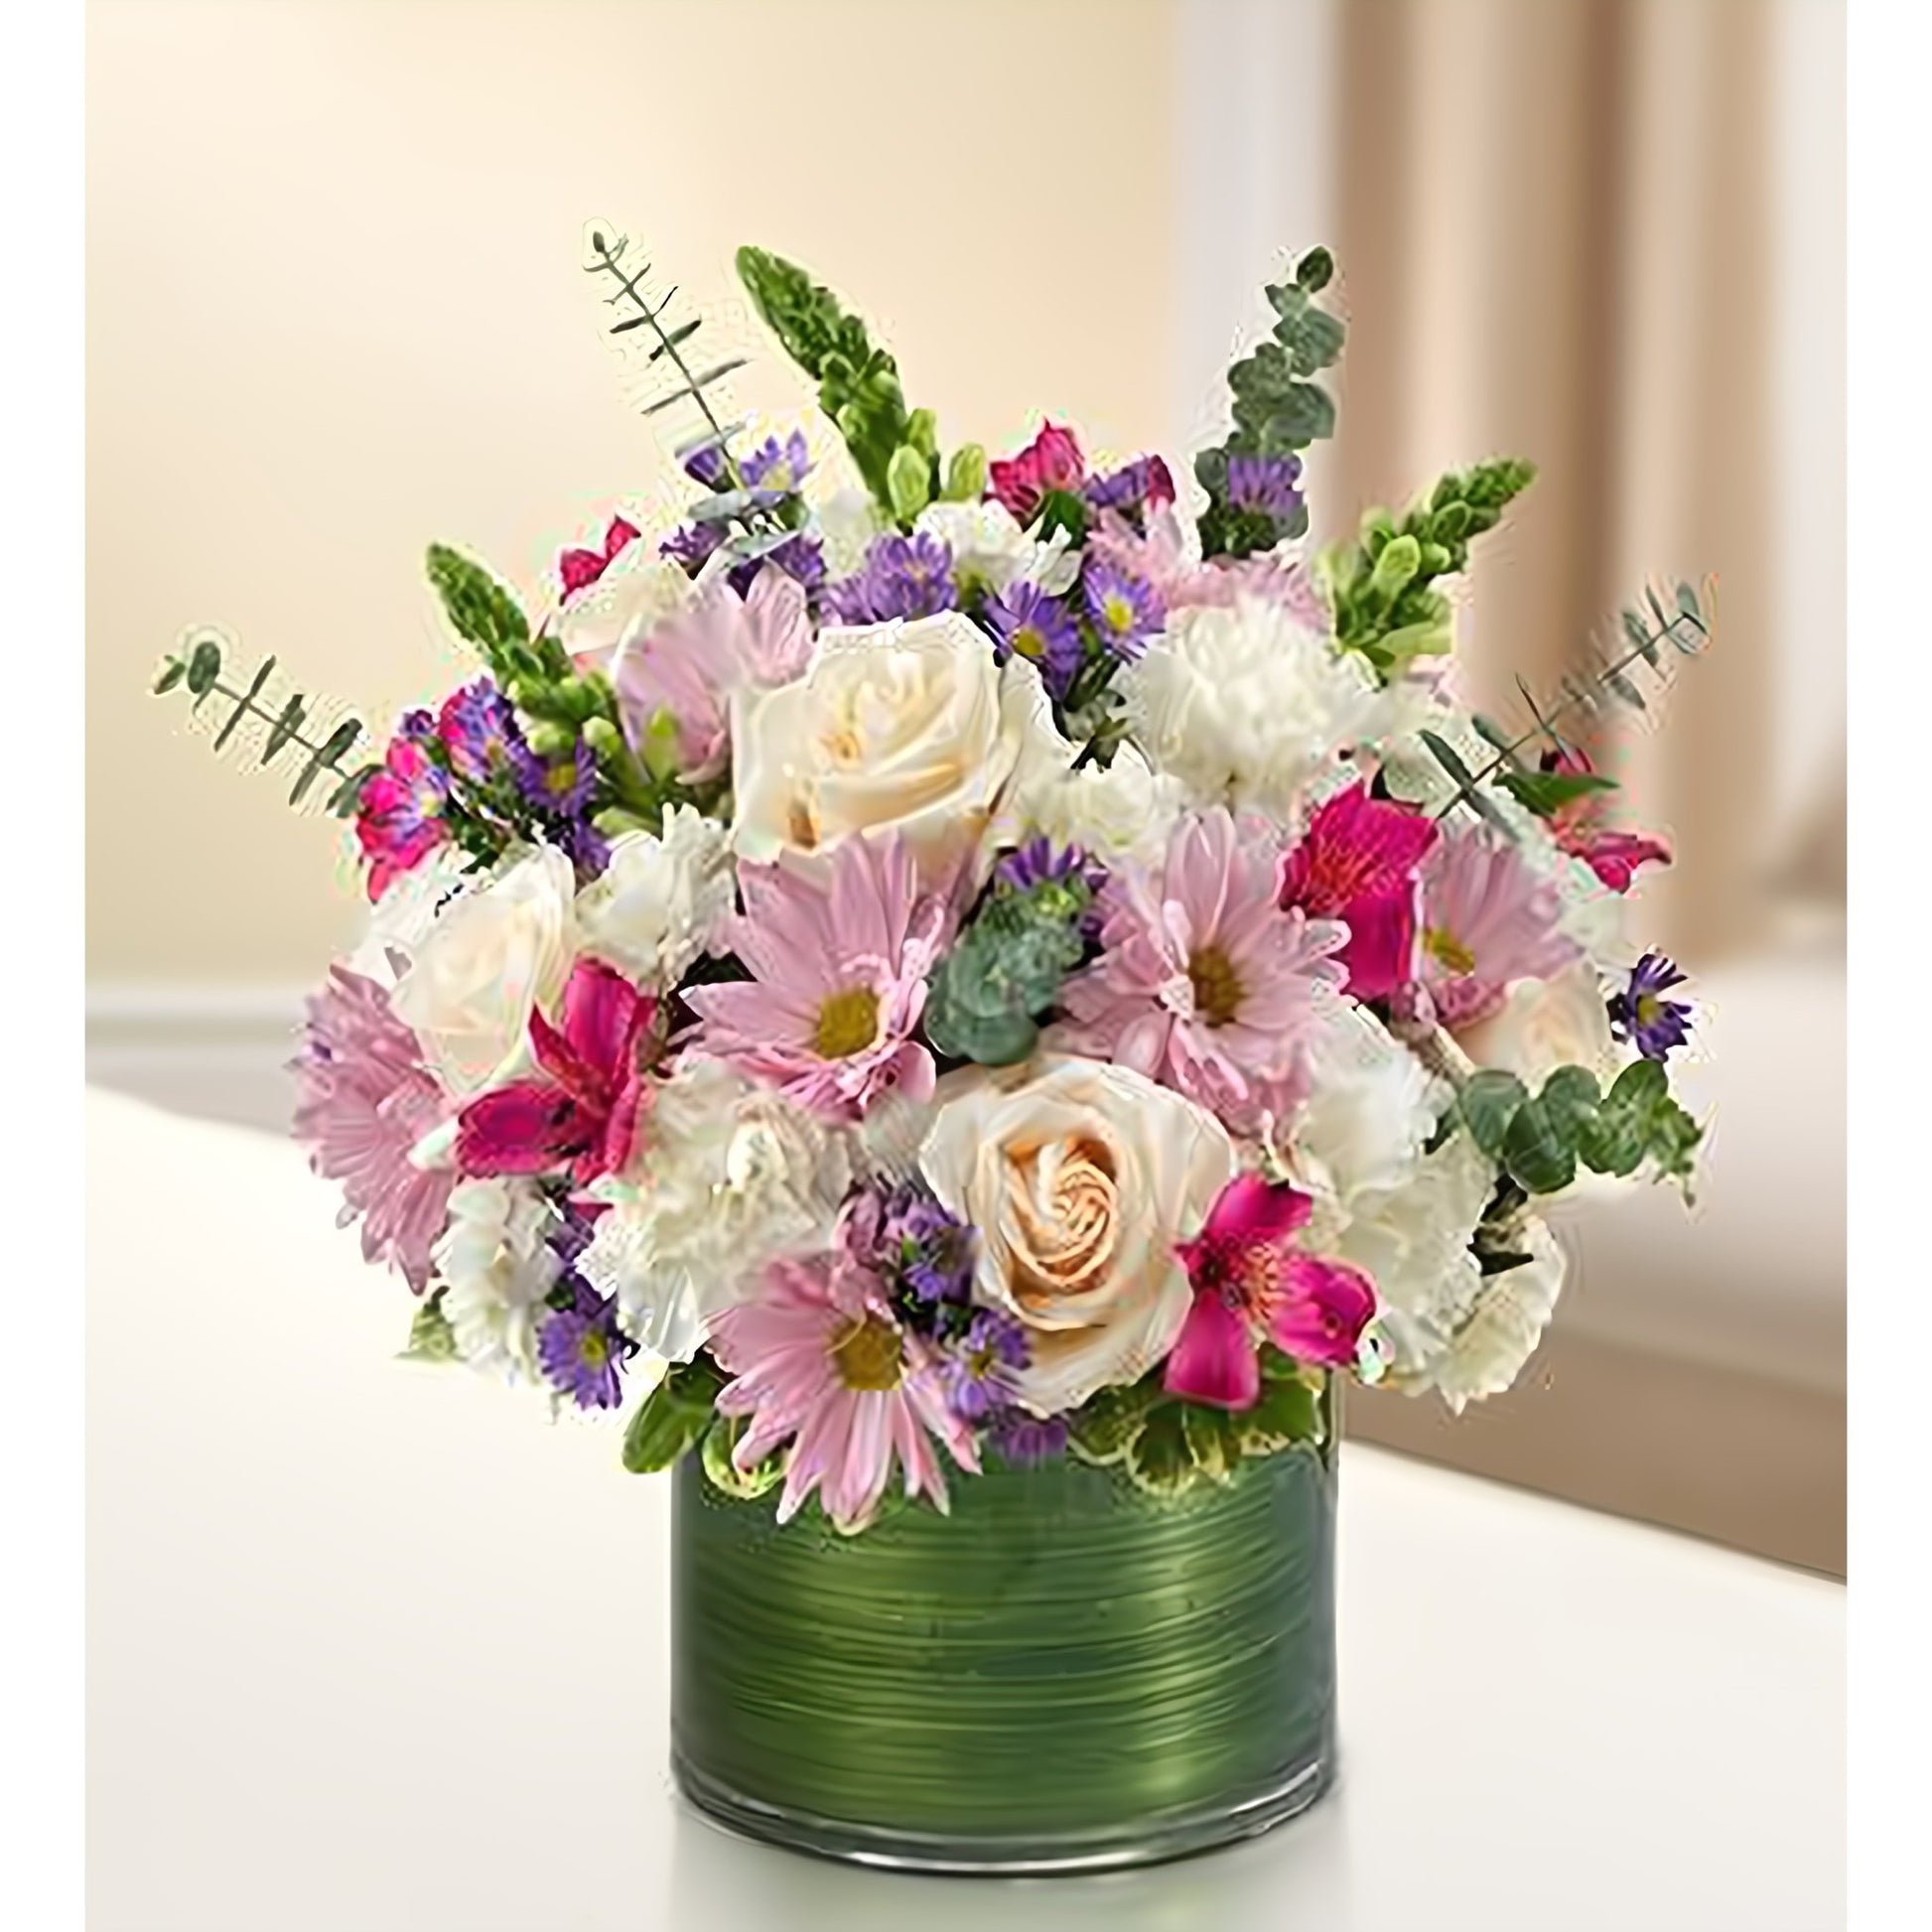 Cherished Memories - Lavender and White - Floral Arrangement - Flower Delivery Brooklyn